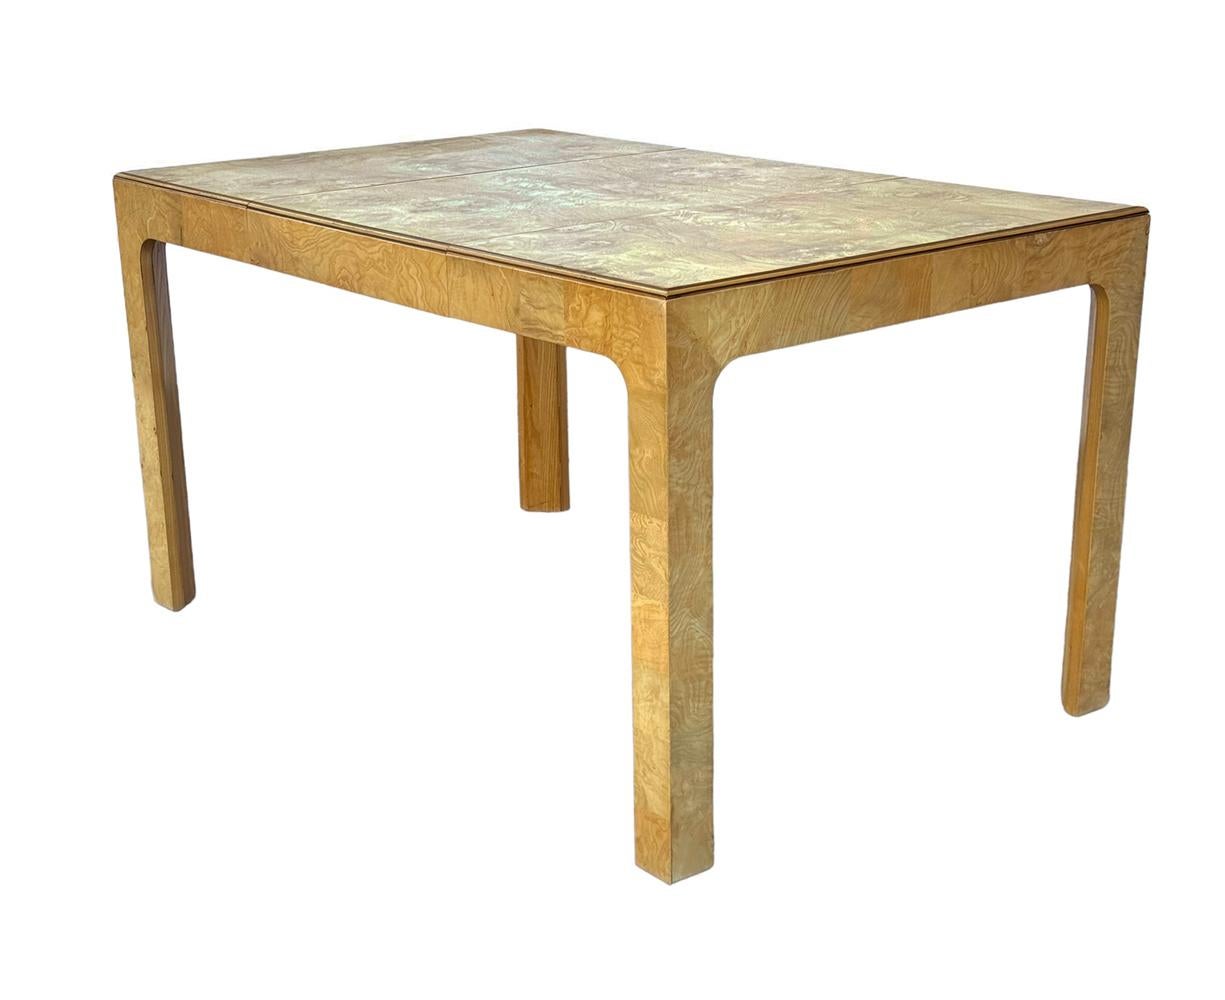 A classic, simple, and modern design for the 1960s. This table features beautiful burl wood in a book matched symmetrical design. Table comes with one 20 inch extension leaf as shown.